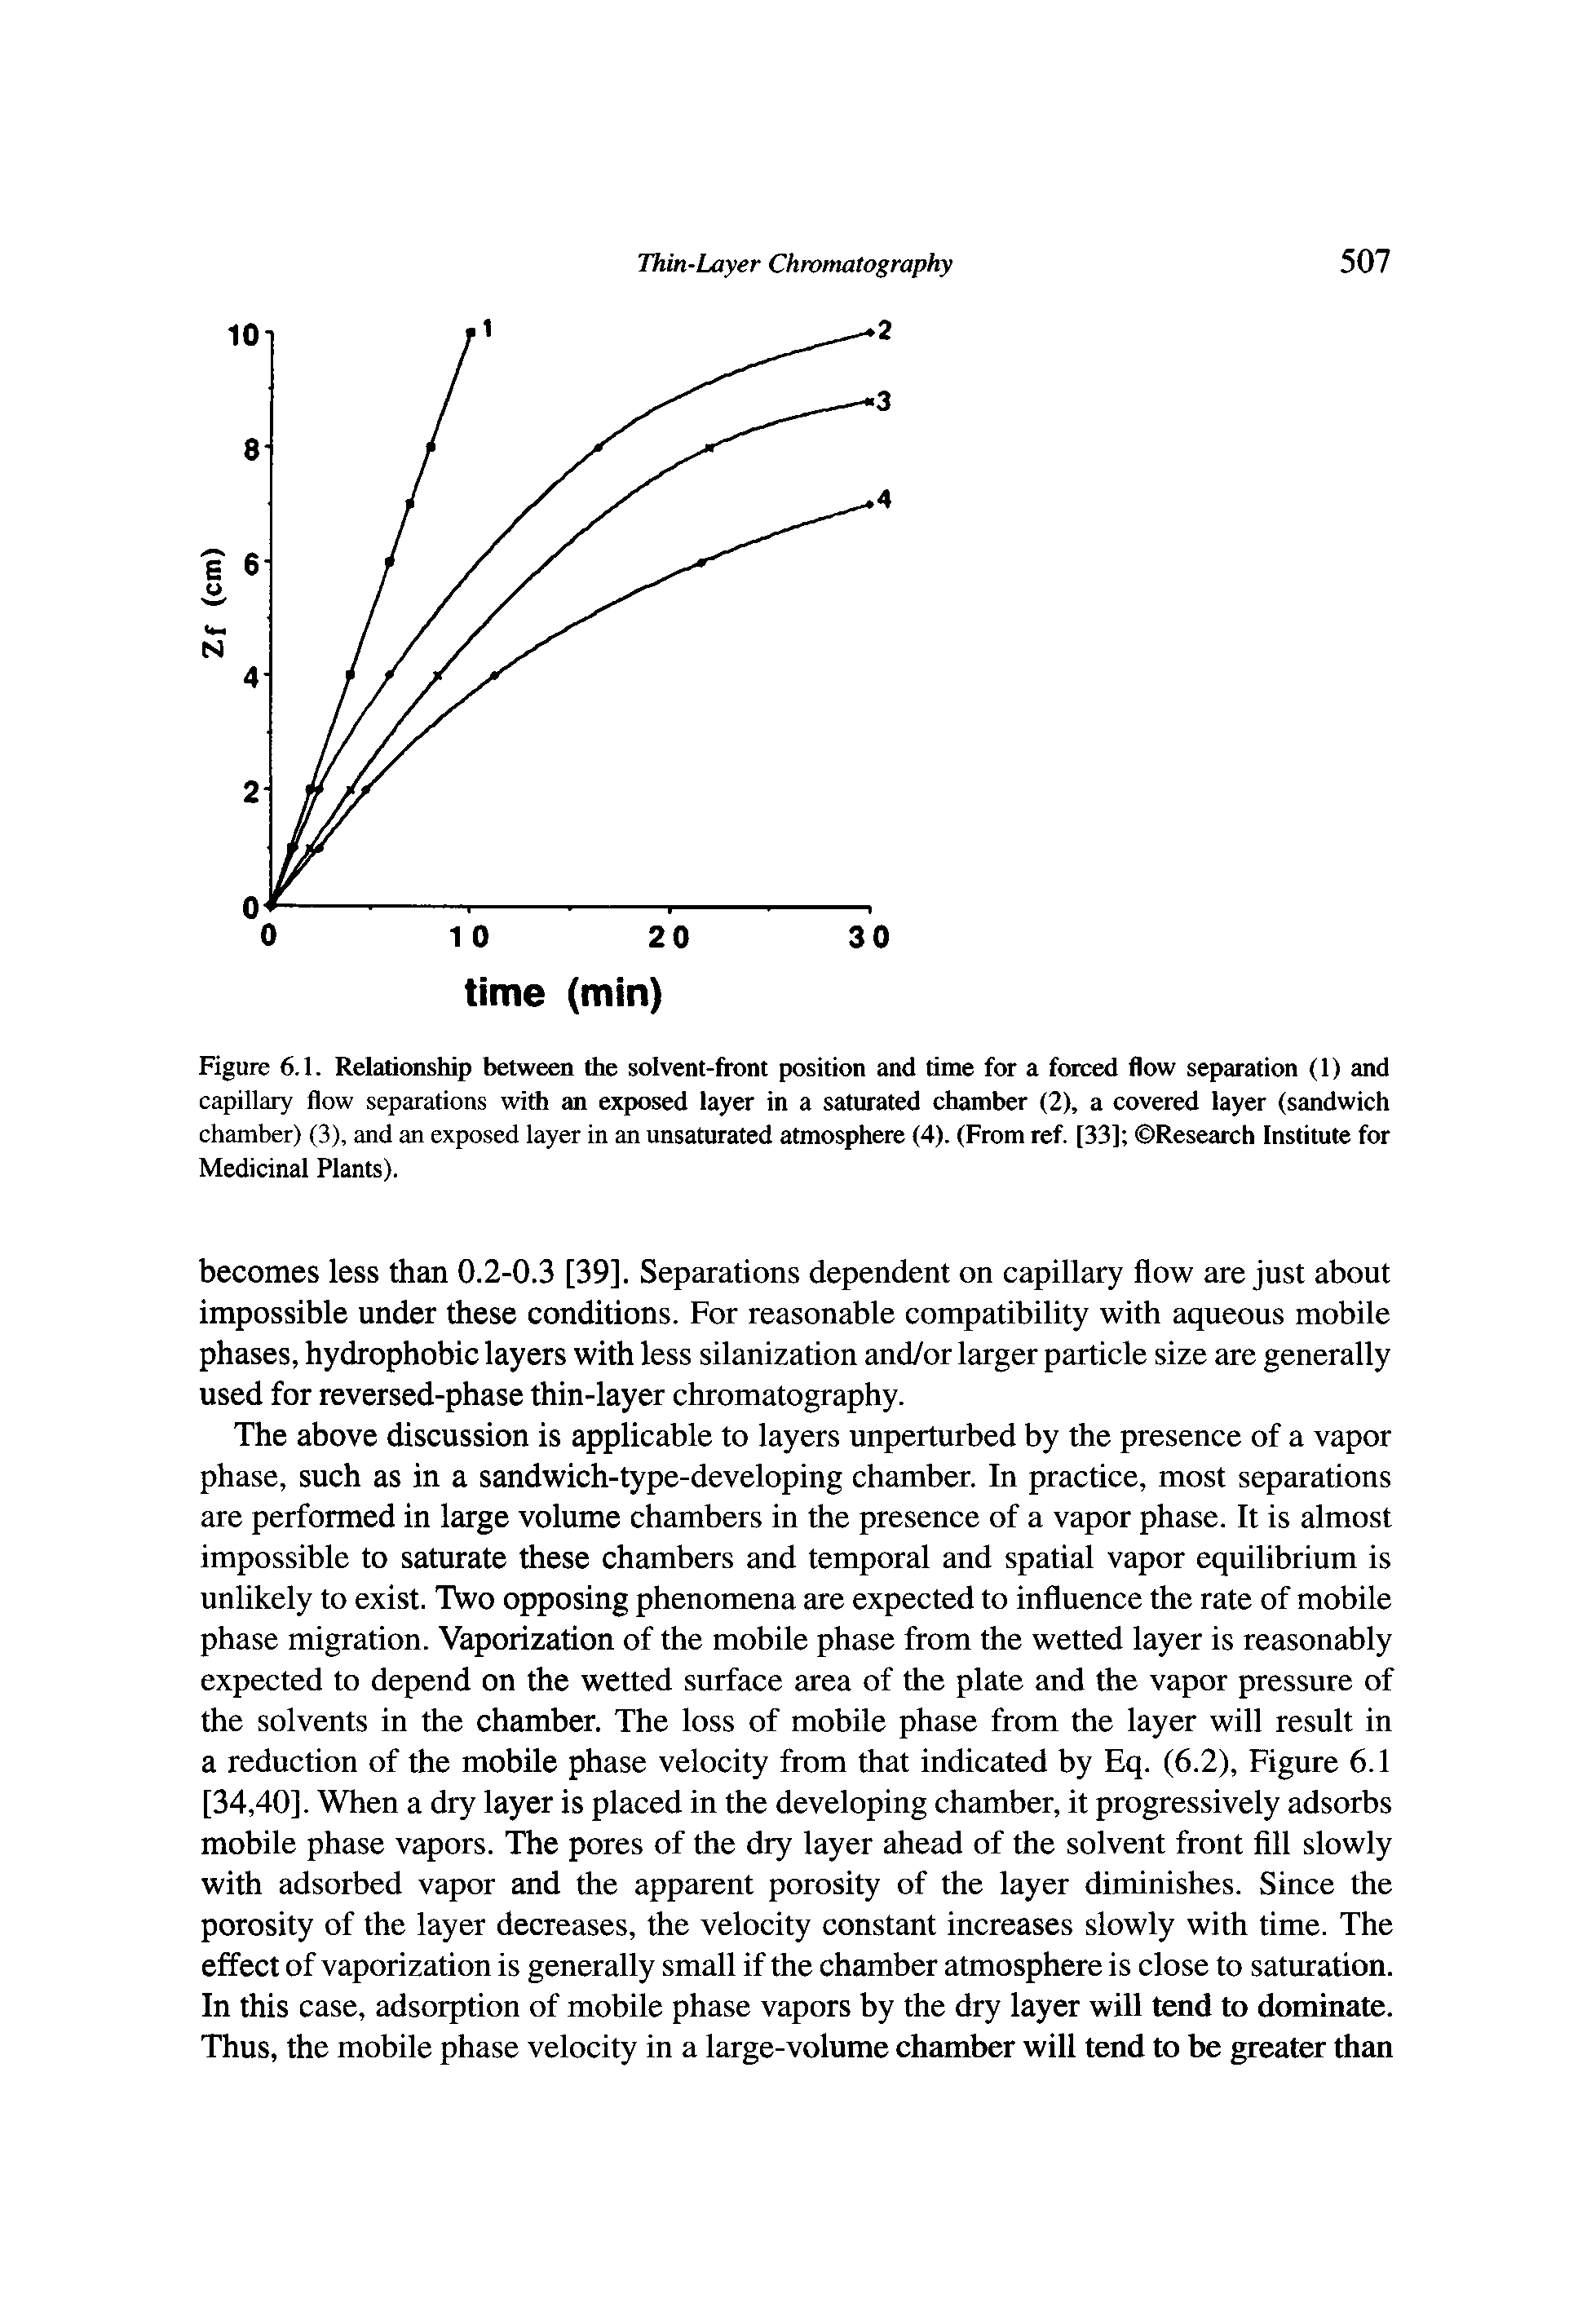 Figure 6.1. Relationship between the solvent-front position and time for a forced flow separation (1) and capillary flow separations with an exposed layer in a saturated chamber (2), a covered layer (sandwich chamber) (3), and an exposed layer in an unsaturated atmosphere (4). (From ref. [33] Research Institute for Medicinal Plants).